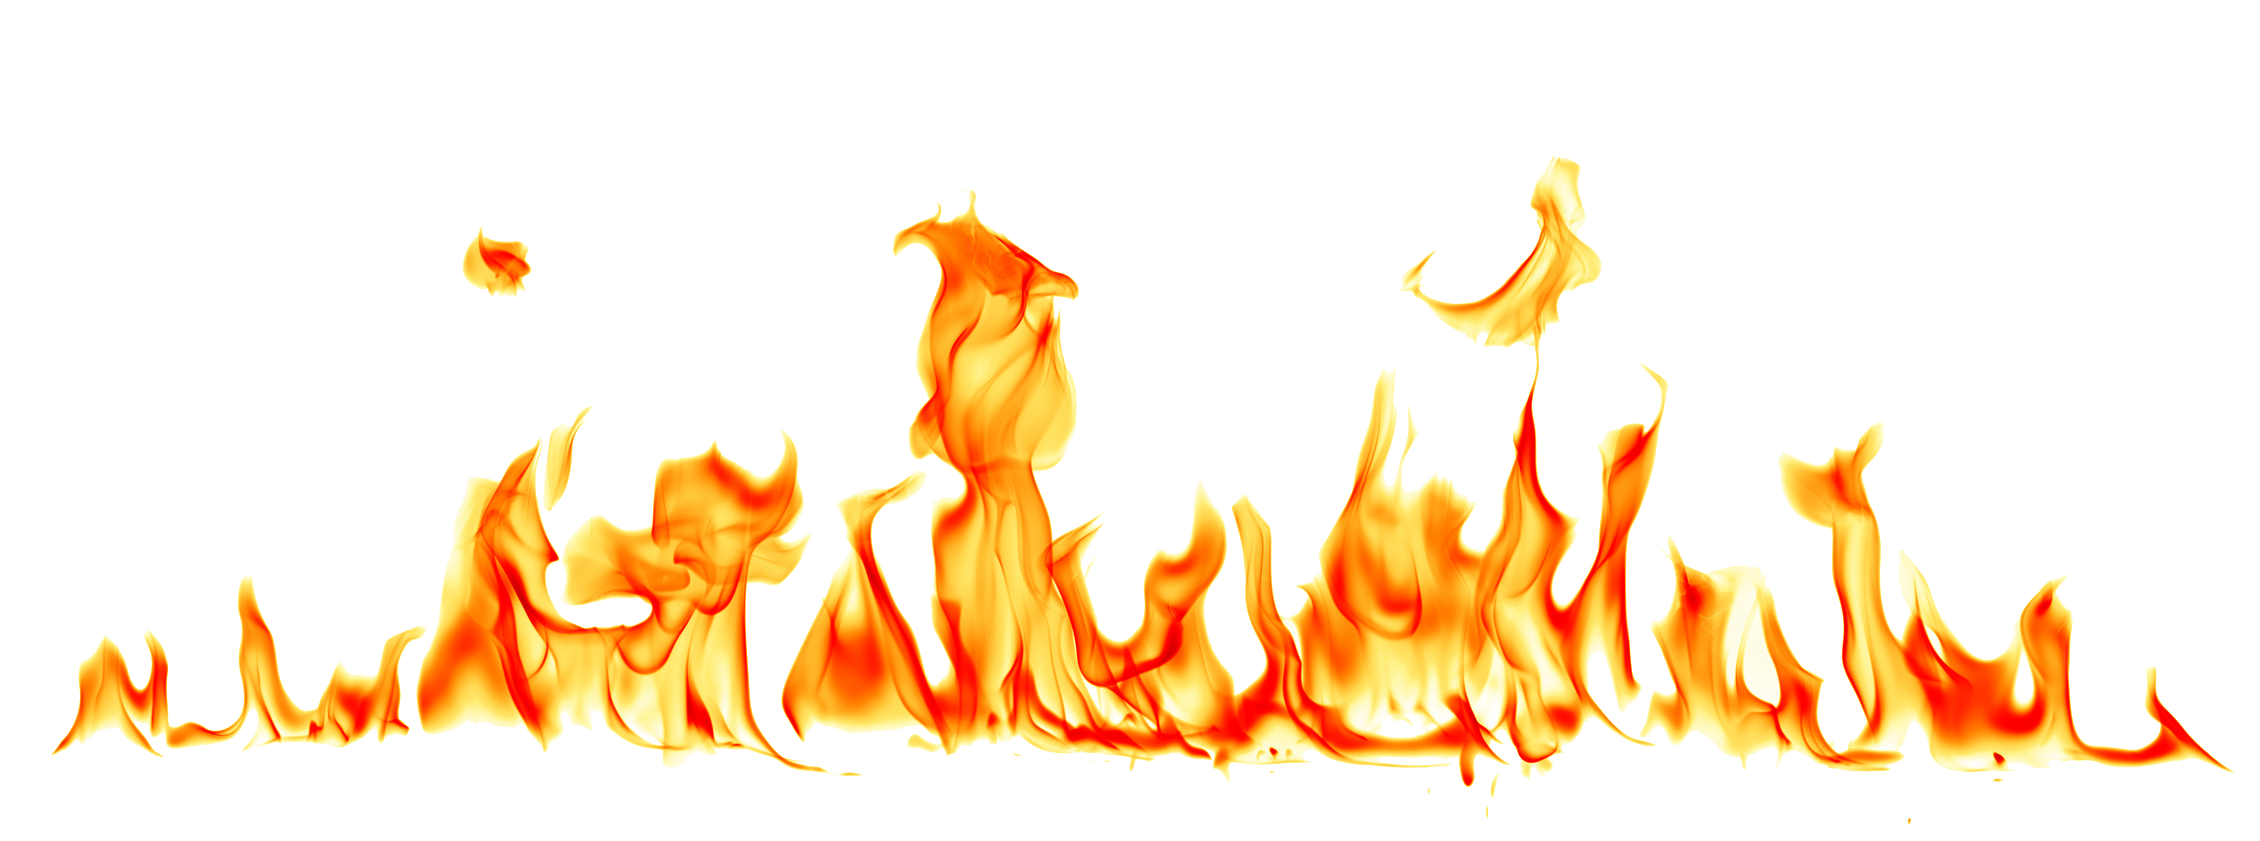 fire background clipart - photo #2